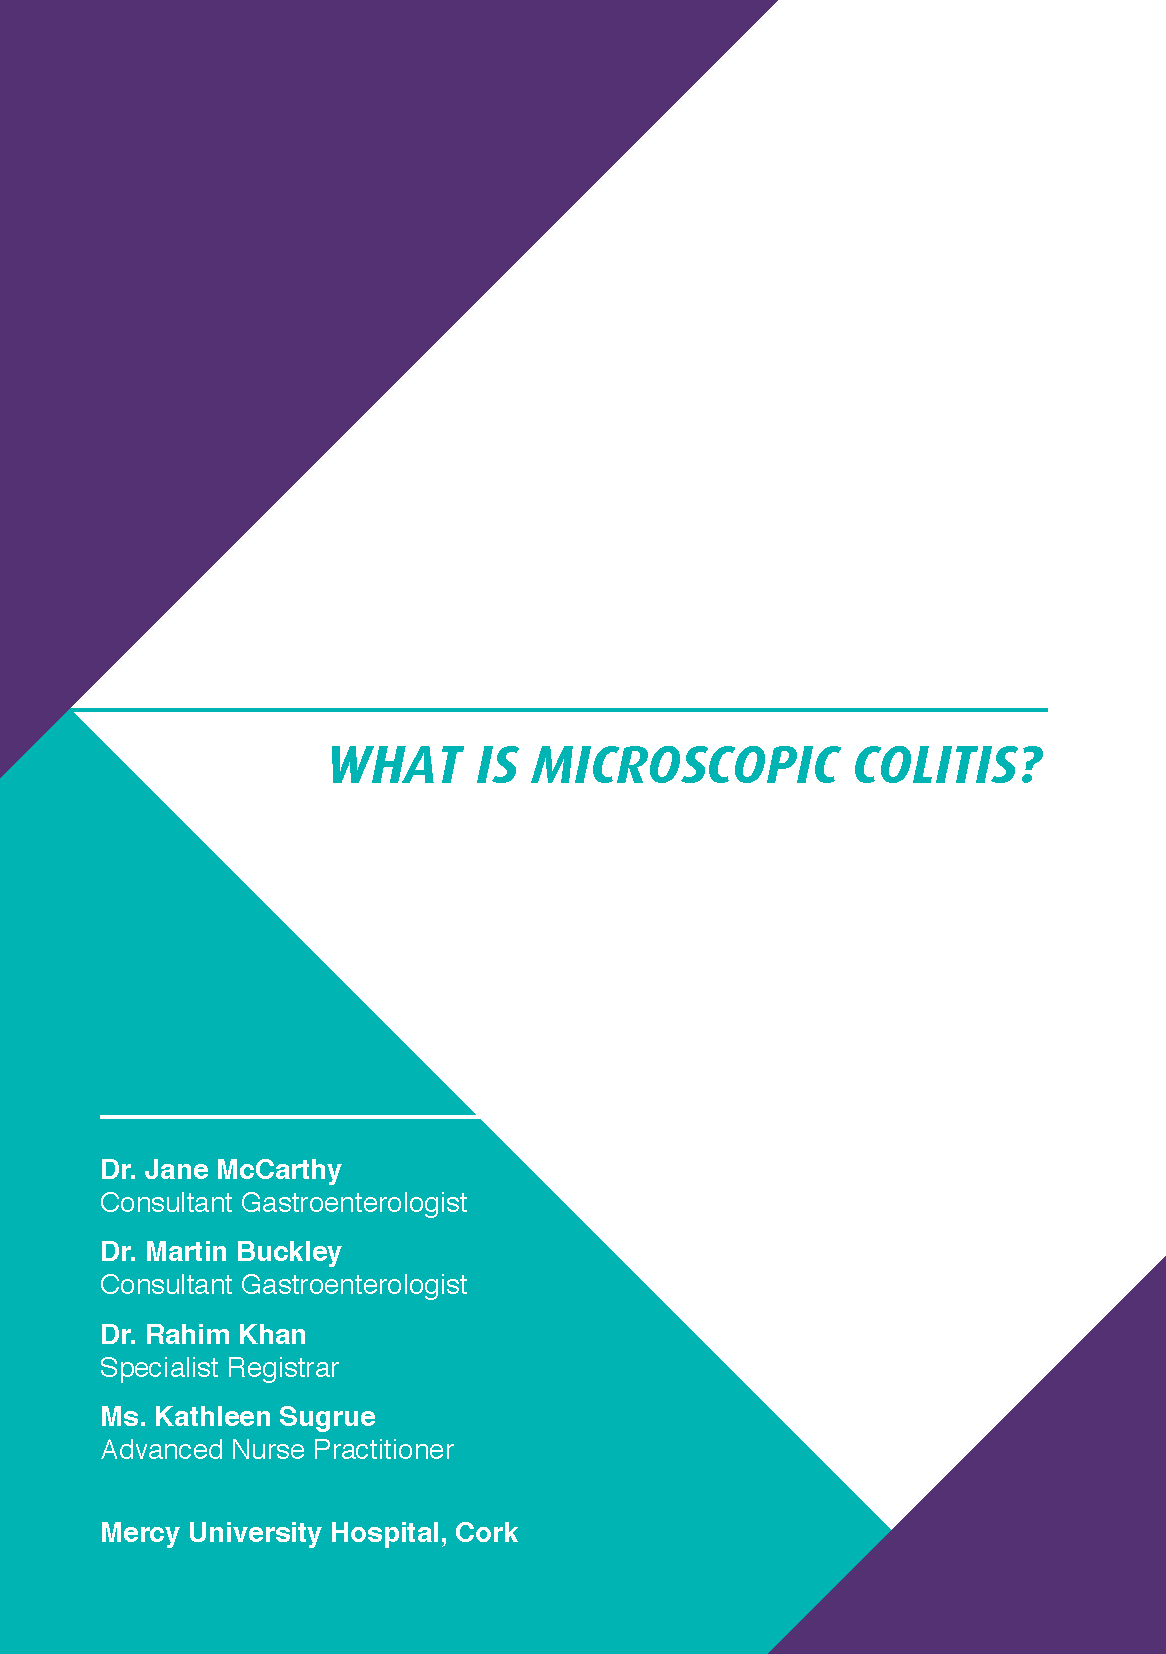 What is Microscopic Colitis